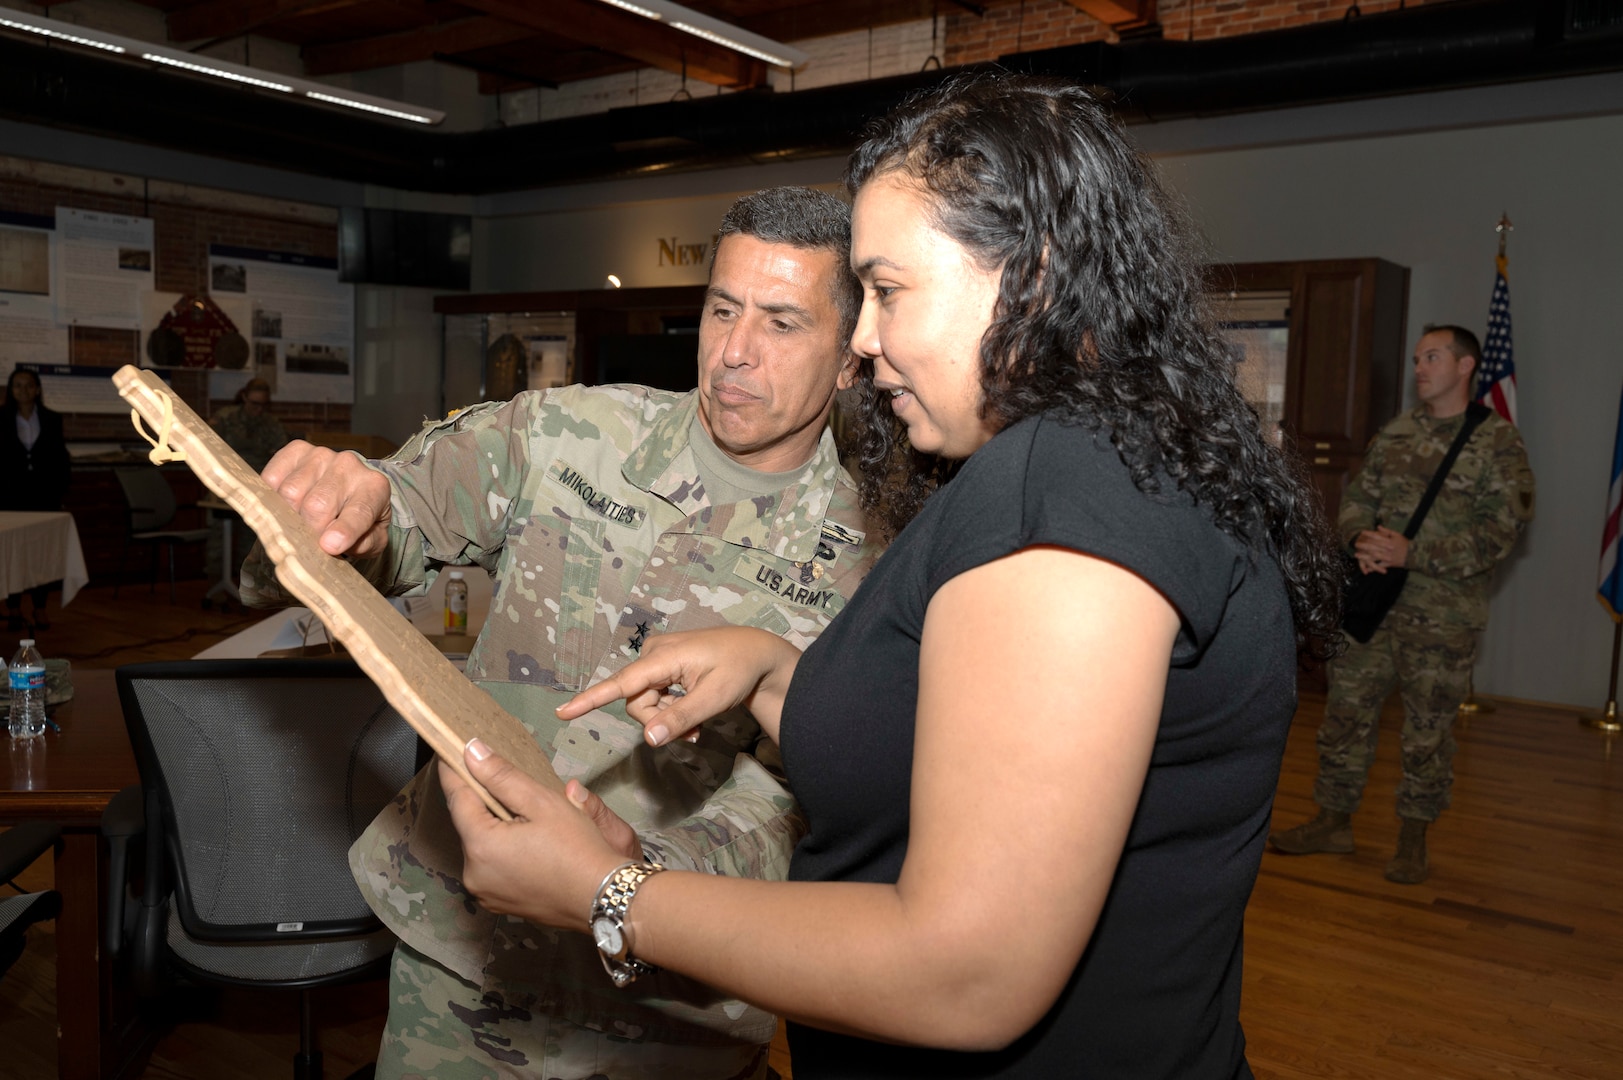 From left, Maj. Gen. David Mikolaities, New Hampshire adjutant general, presents Cabo Verde Minister of Defense Janine Lélis with an intricately carved map of the state at the end of a State Partnership Program workshop June 10, 2022, in Concord, New Hampshire. Lélis and delegates from the African archipelagic country visited June 8-10 to discuss NHNG capabilities and opportunities to work together.